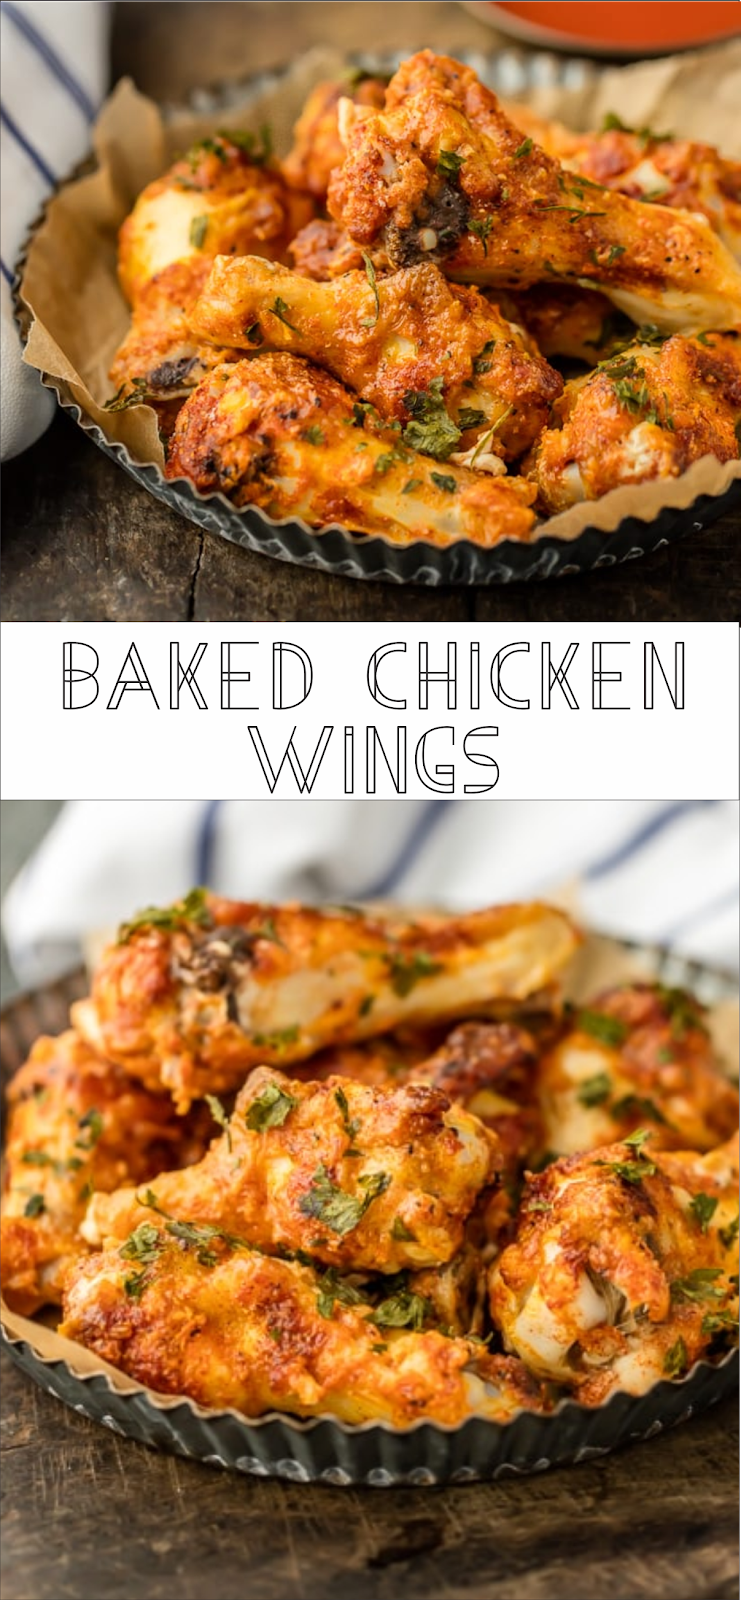 Baked Chicken Wings | Floats CO